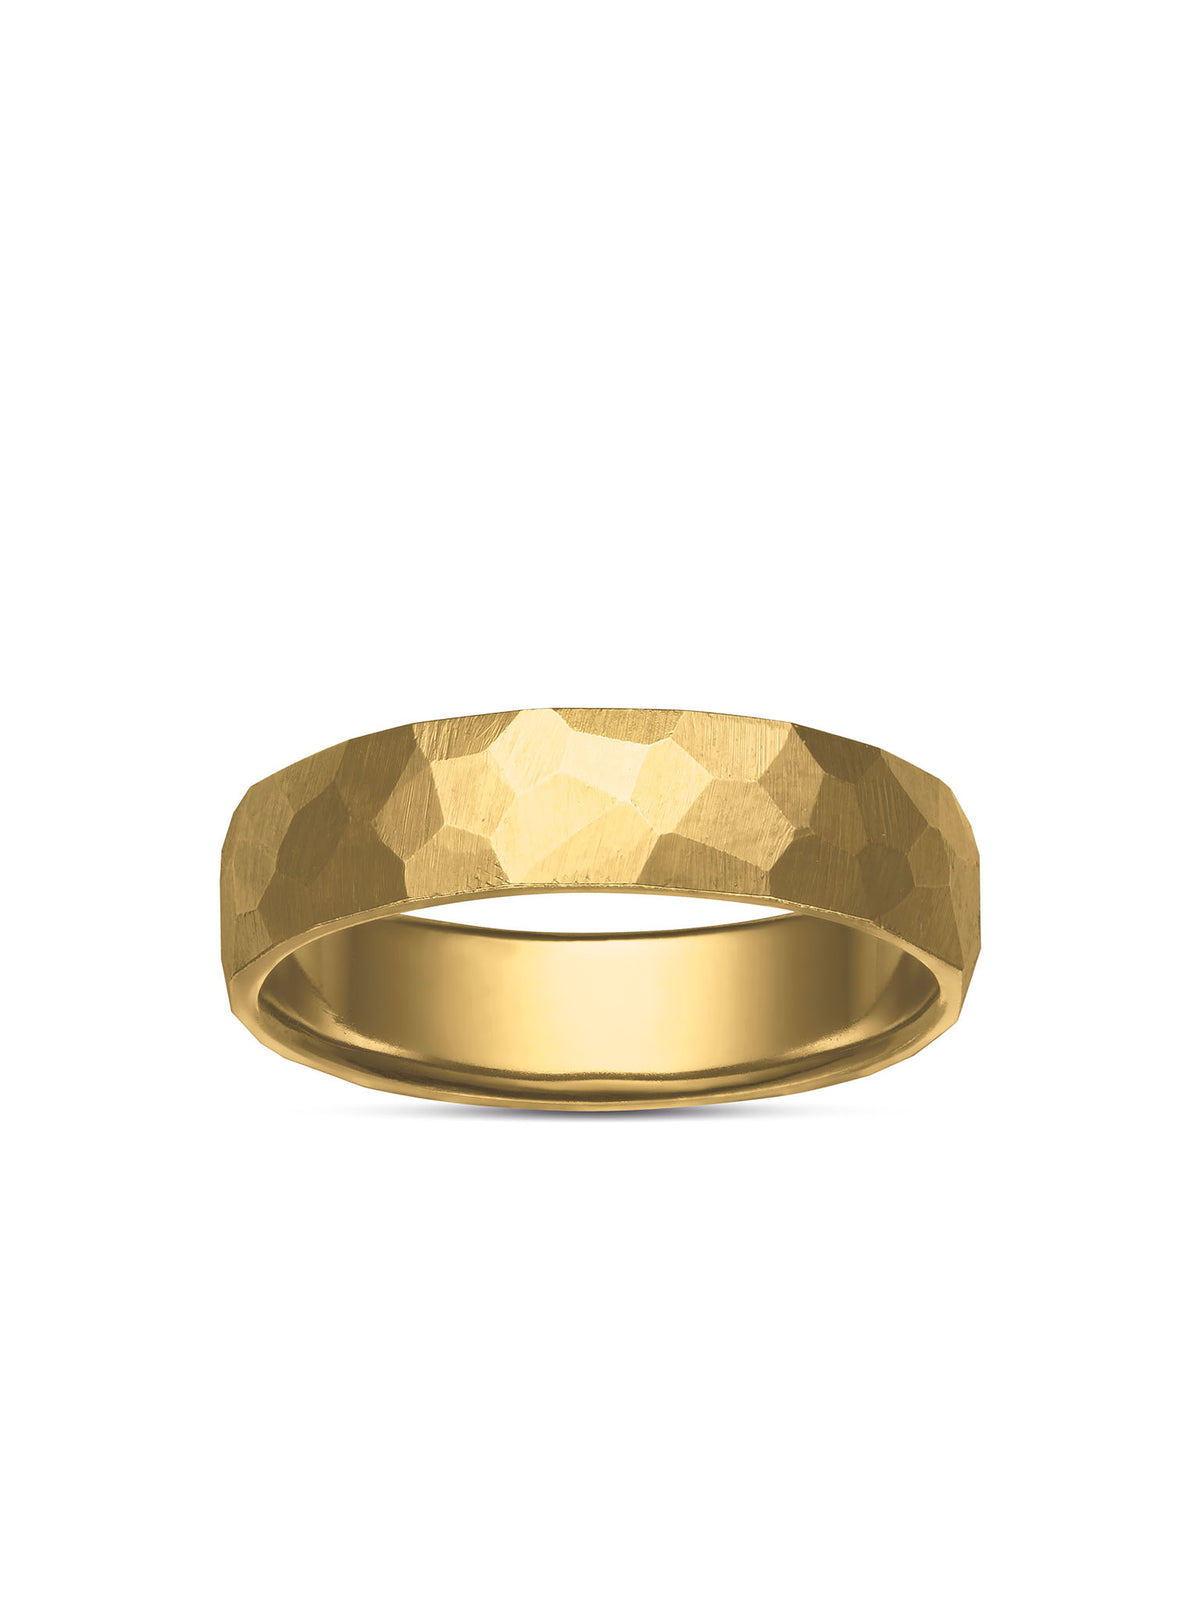 Faceted Wedding Band / Gold